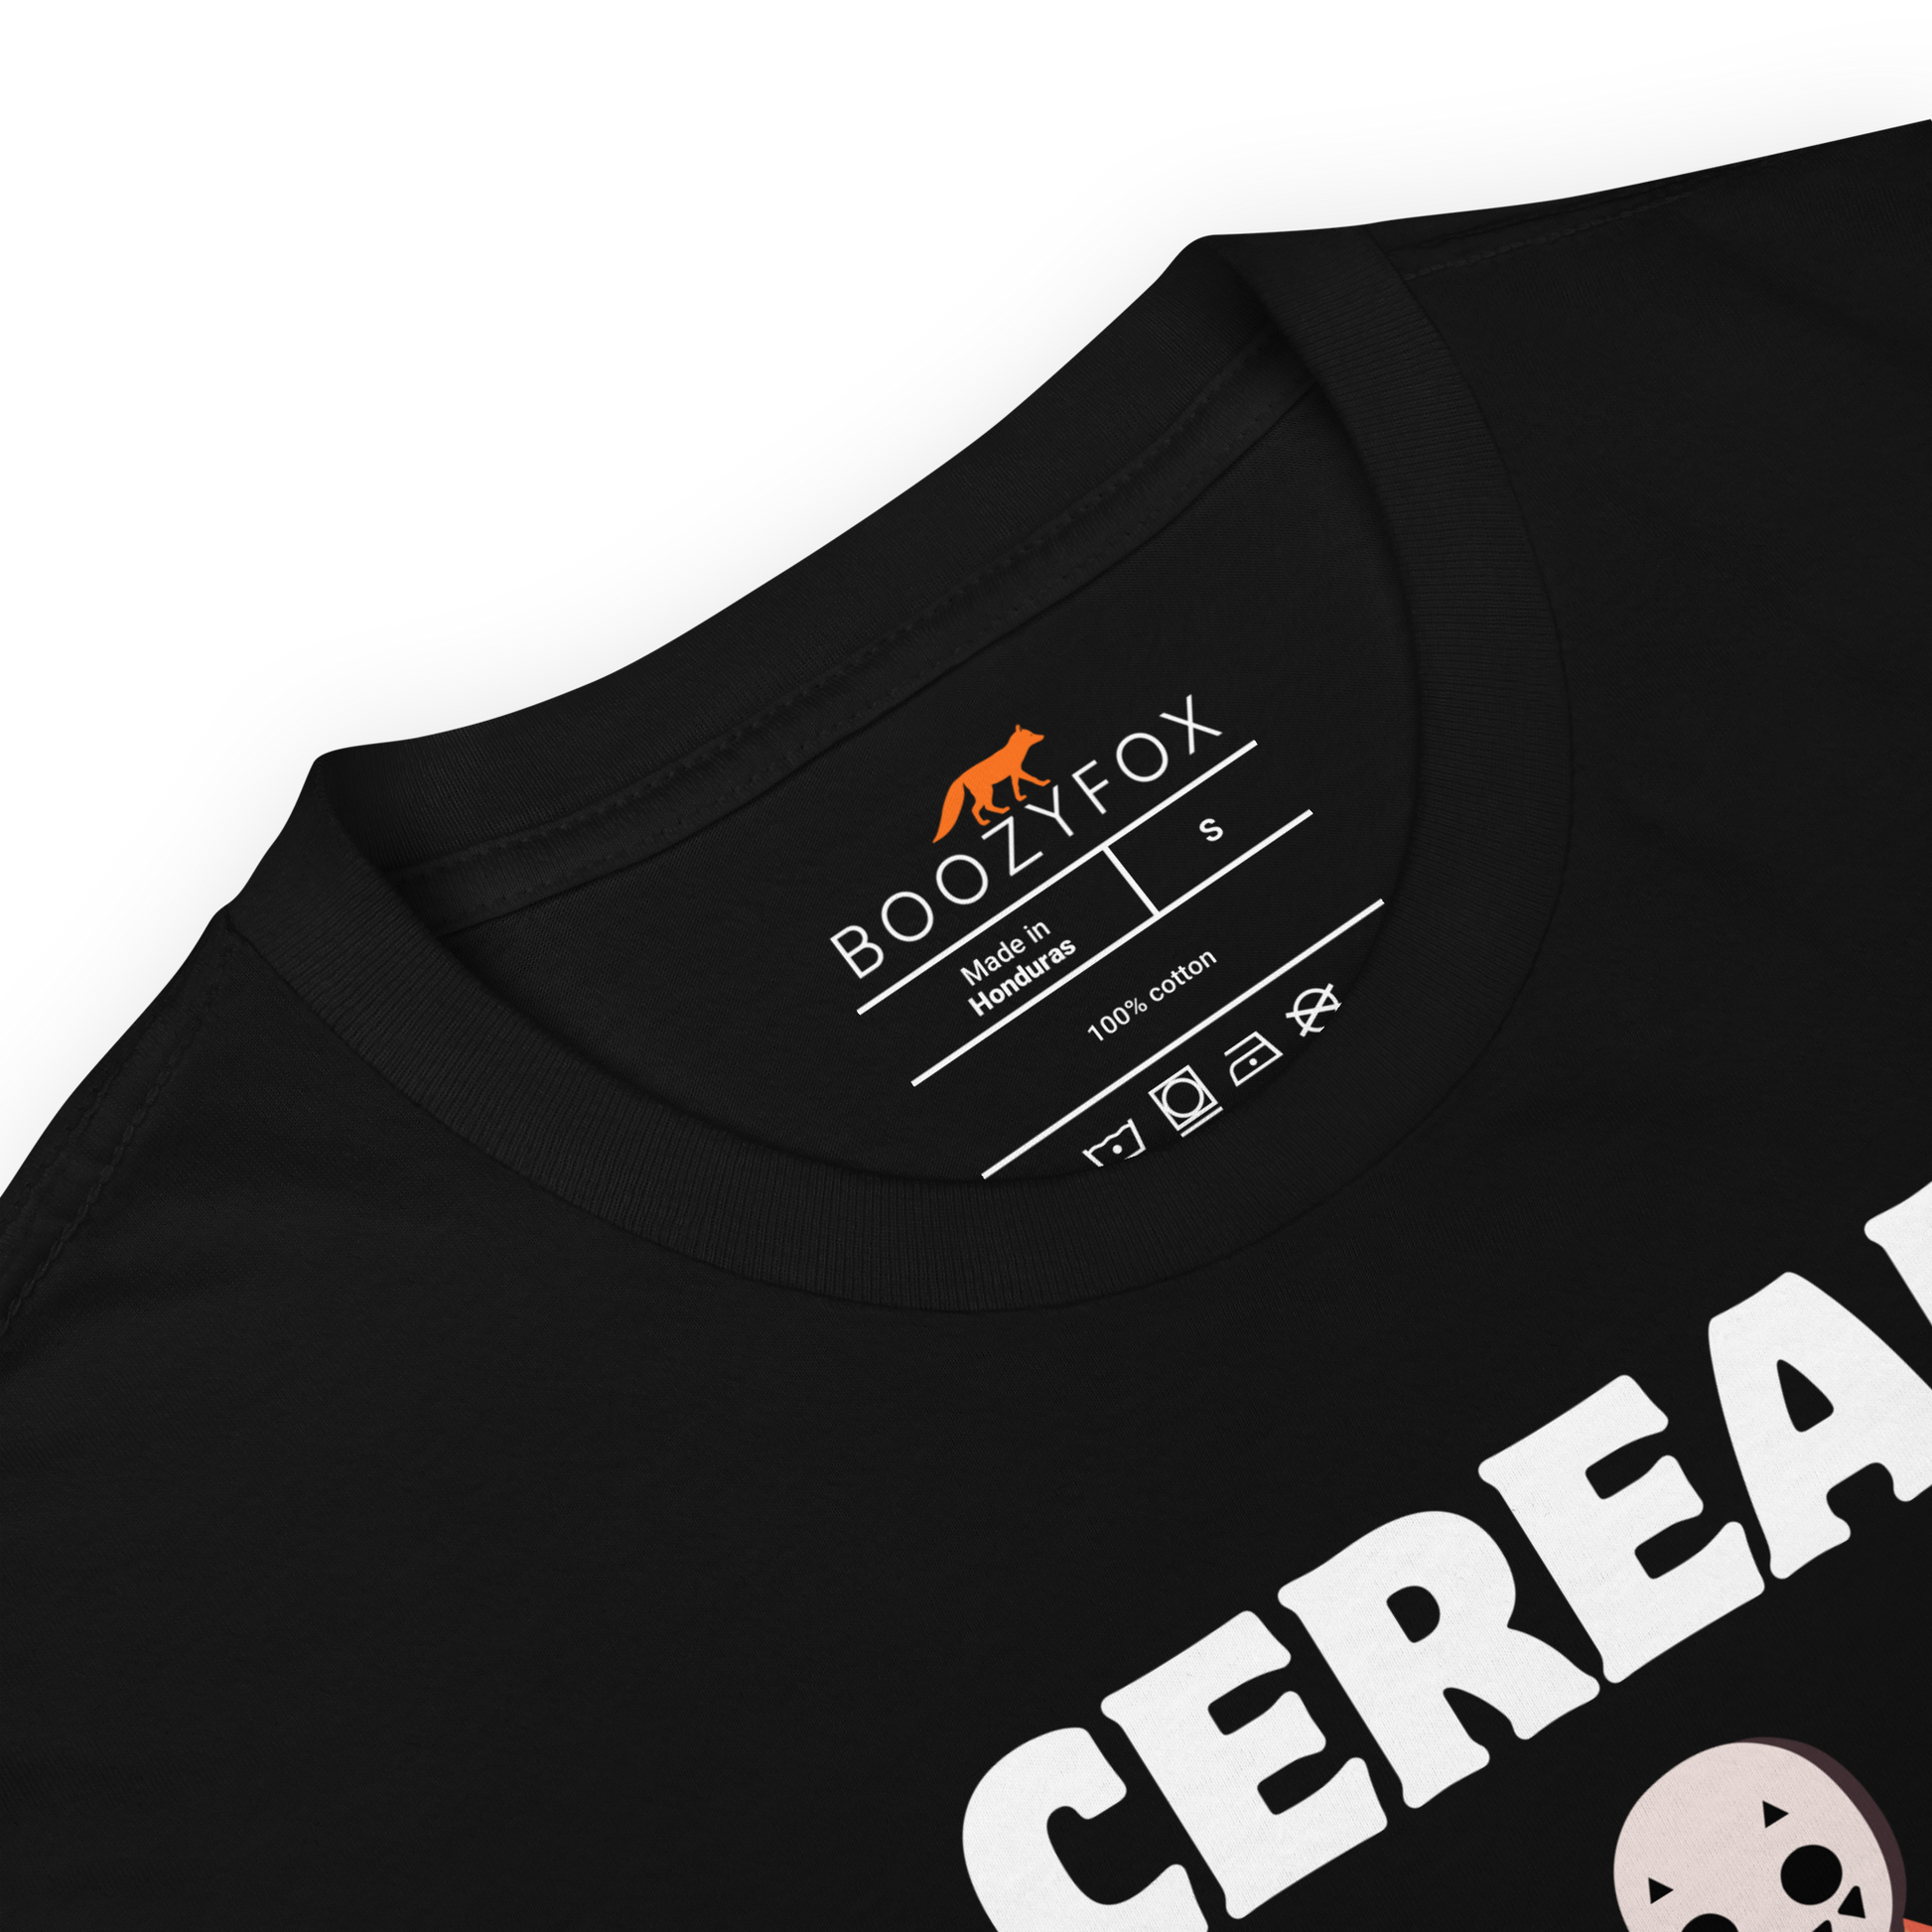 Product details of a Black Cereal Killer T-Shirt featuring a Cereal Killer graphic on the chest - Funny Graphic T-Shirts - Boozy Fox